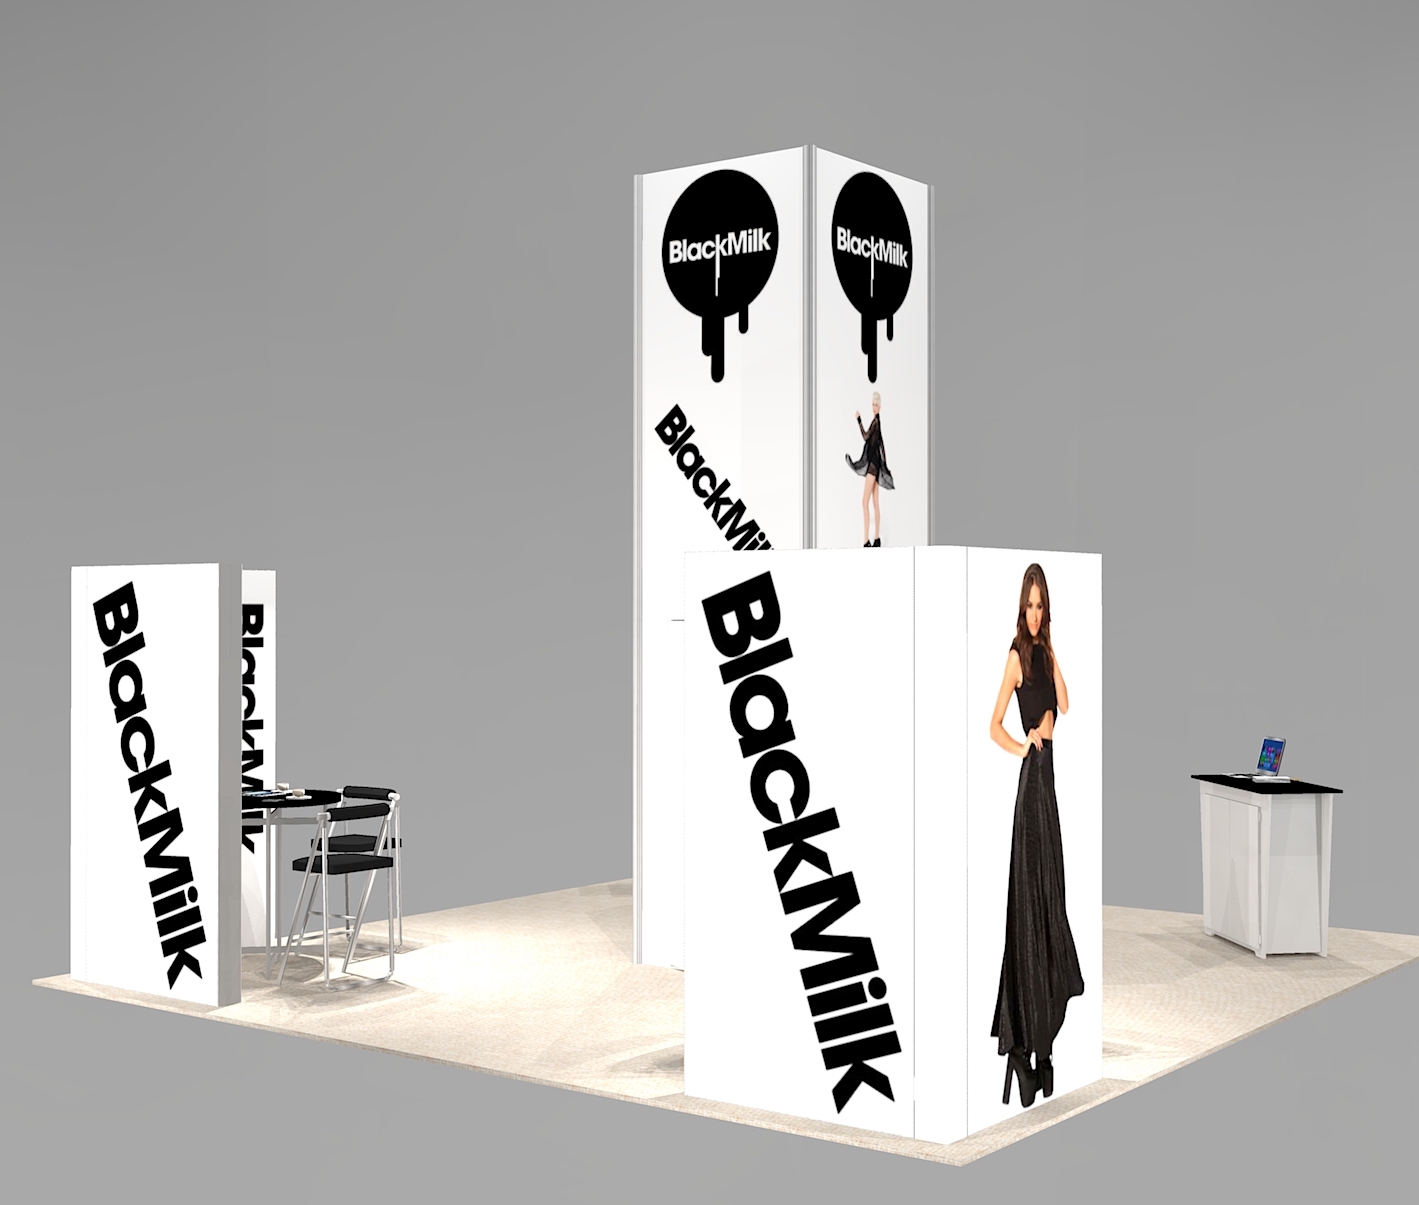 20x20 island booth space exhibit with meeting spaces